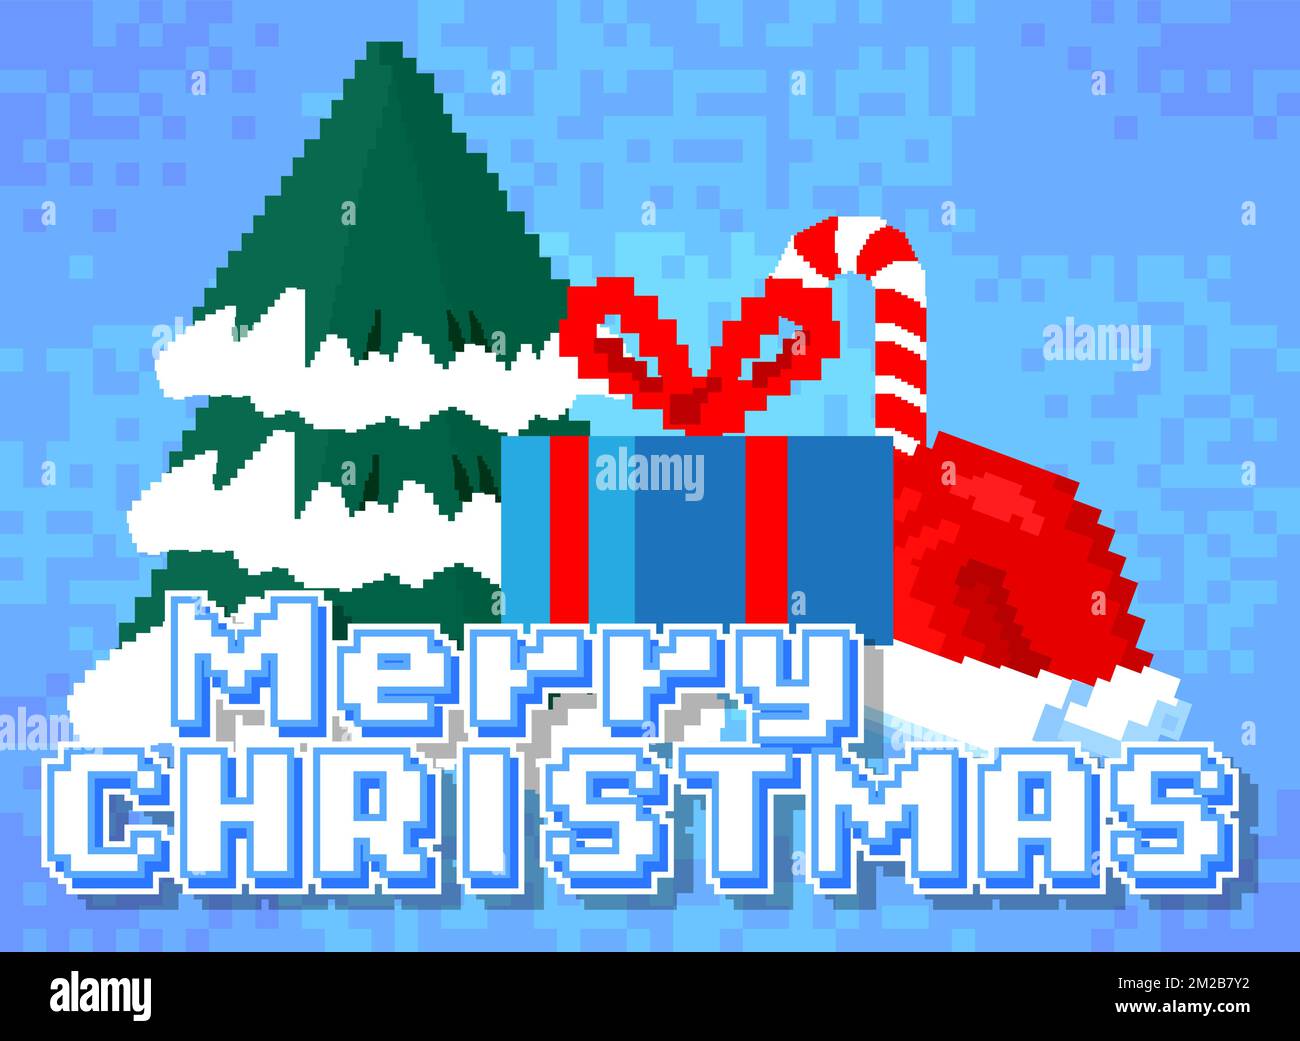 Merry Christmas. Pixelated word with geometric graphic background. Vector cartoon illustration. Stock Vector